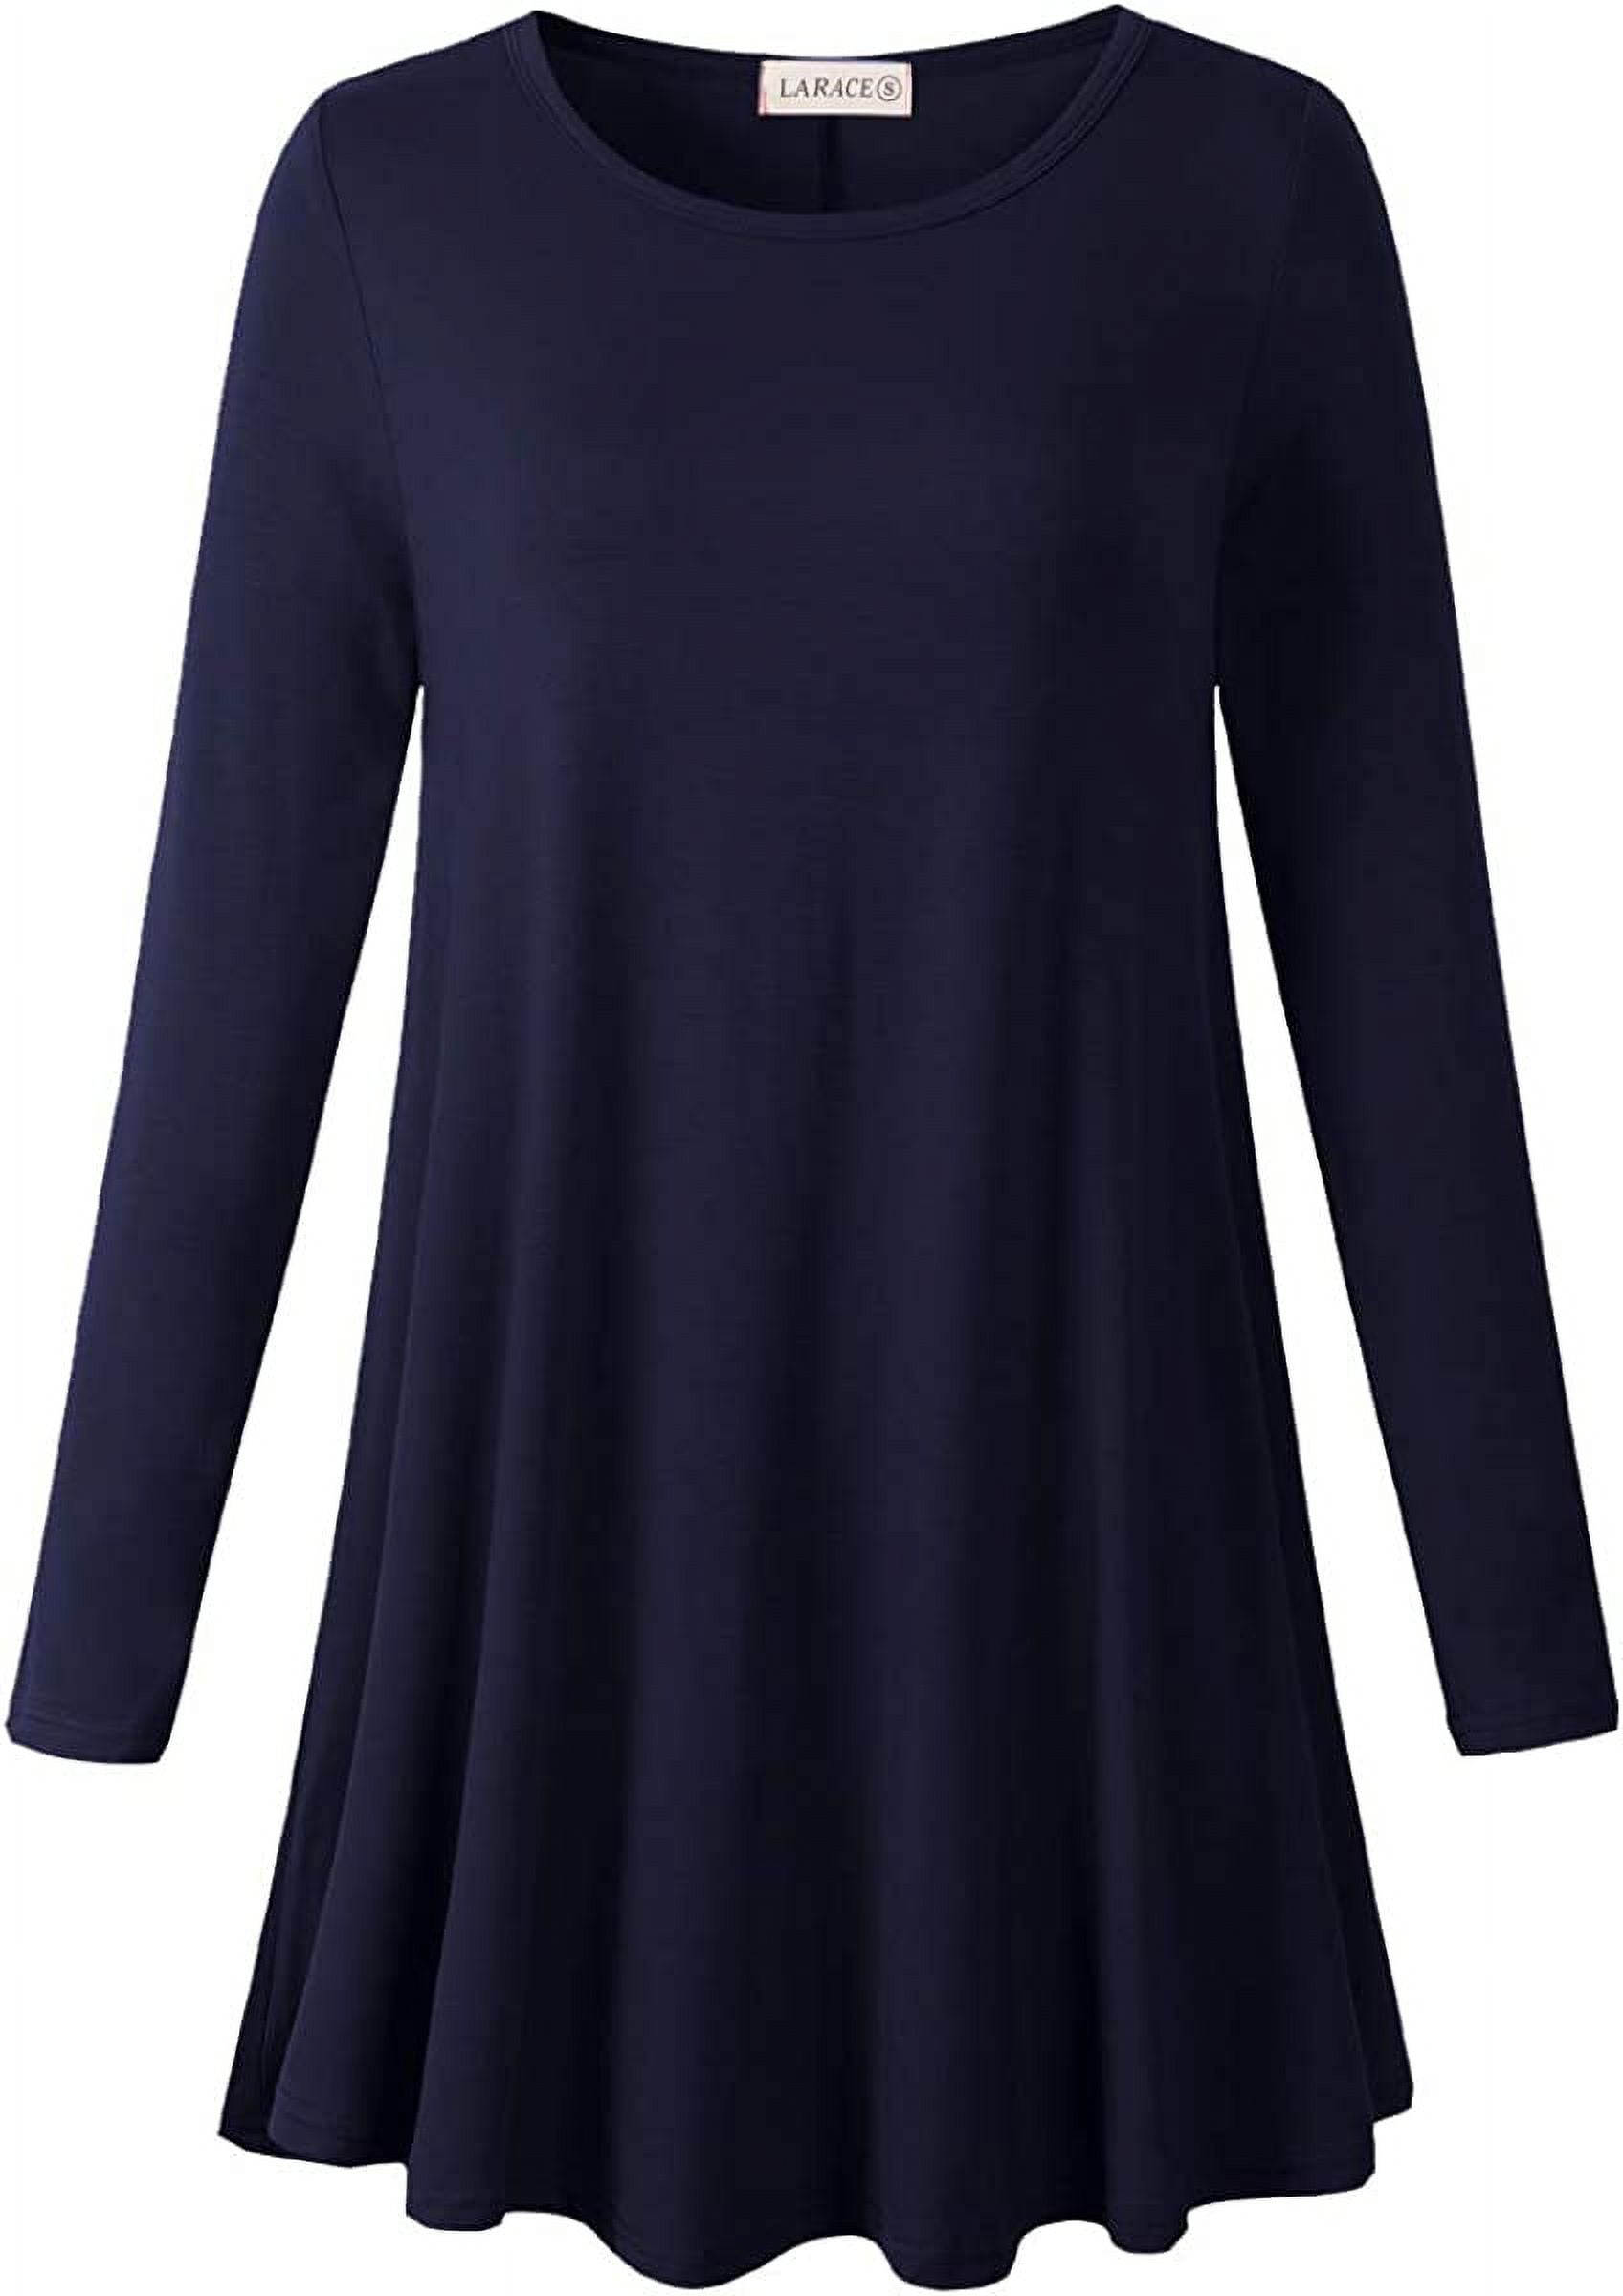 LARACE Plus Size Tunic Tops for Women Long Sleeve Swing Shirt Loose Fit  Flowy Clothing for Leggings 8053 - Navy Blue / 1XL